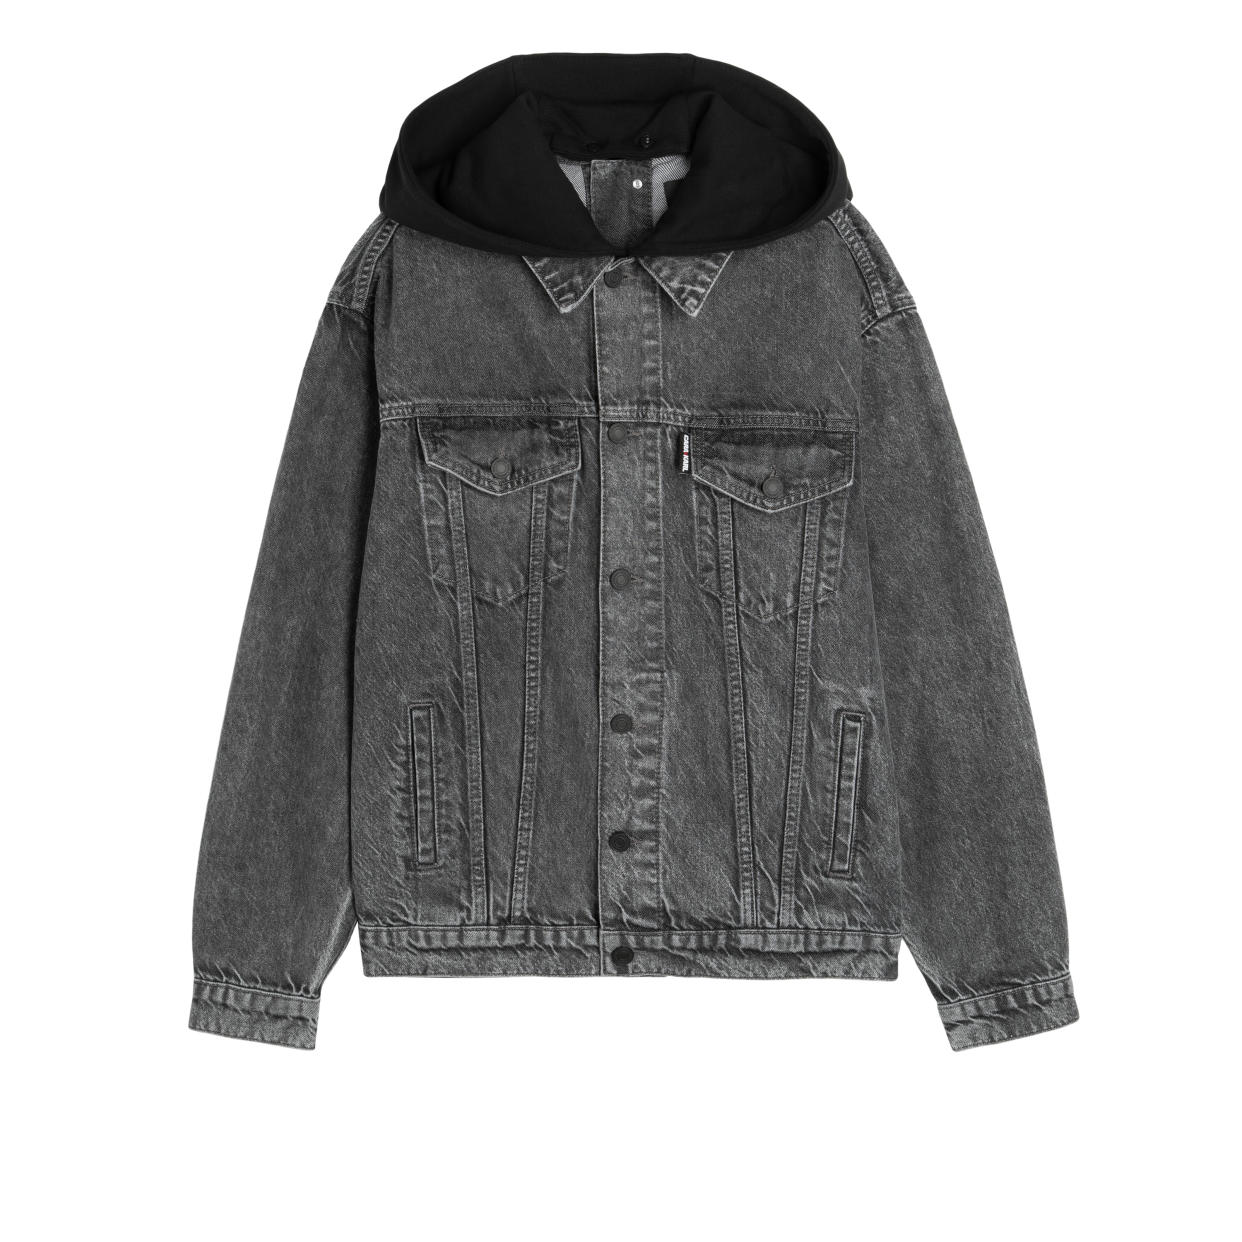 This jeans jacket from the Cara Loves Karl range has a removable hood. - Credit: Courtesy of Karl Lagerfeld